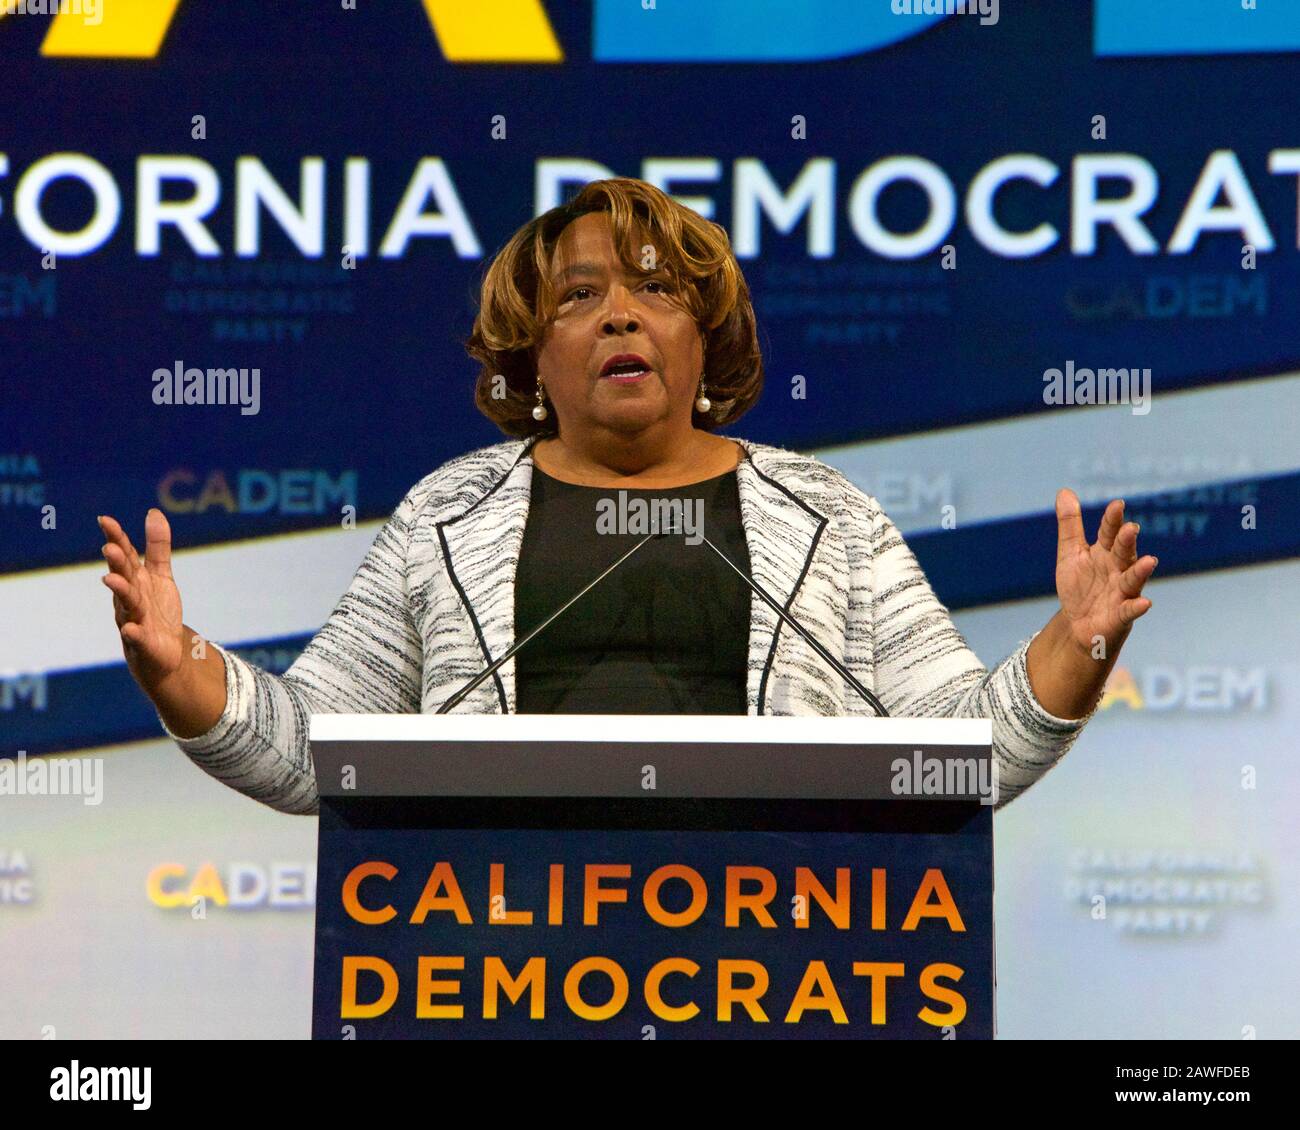 Long Beach, CA - Nov 16, 2019: Union chief, Yvonne Walker, speaking at the Democratic Party Endorsing Convention. Stock Photo